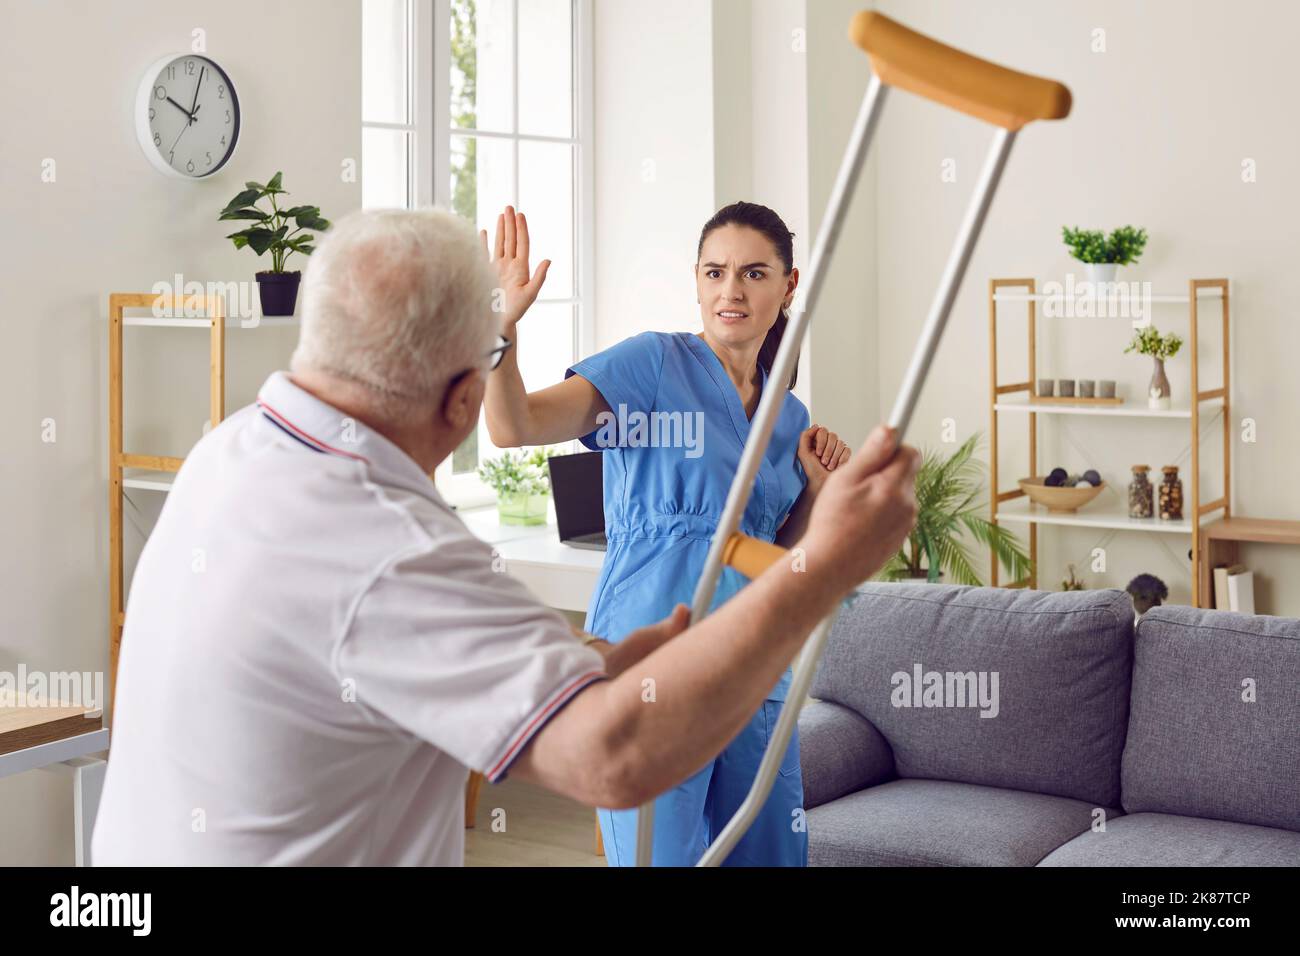 Angry, aggressive senior patient wants to fight and threatens nurse with his crutch Stock Photo